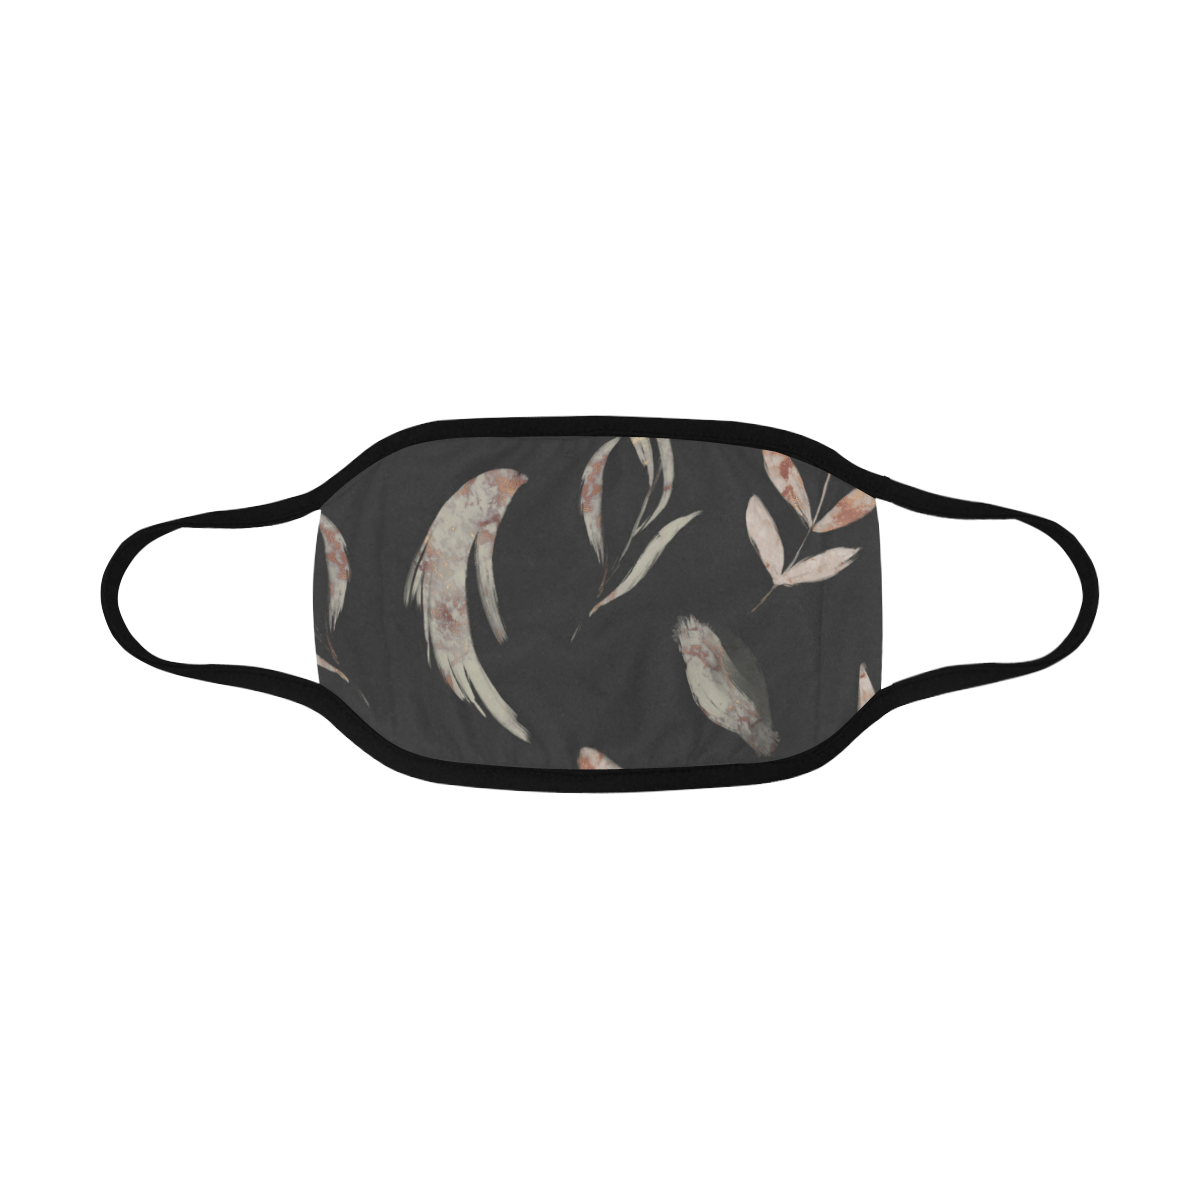 Black Leaves Mouth Mask Mouth Mask